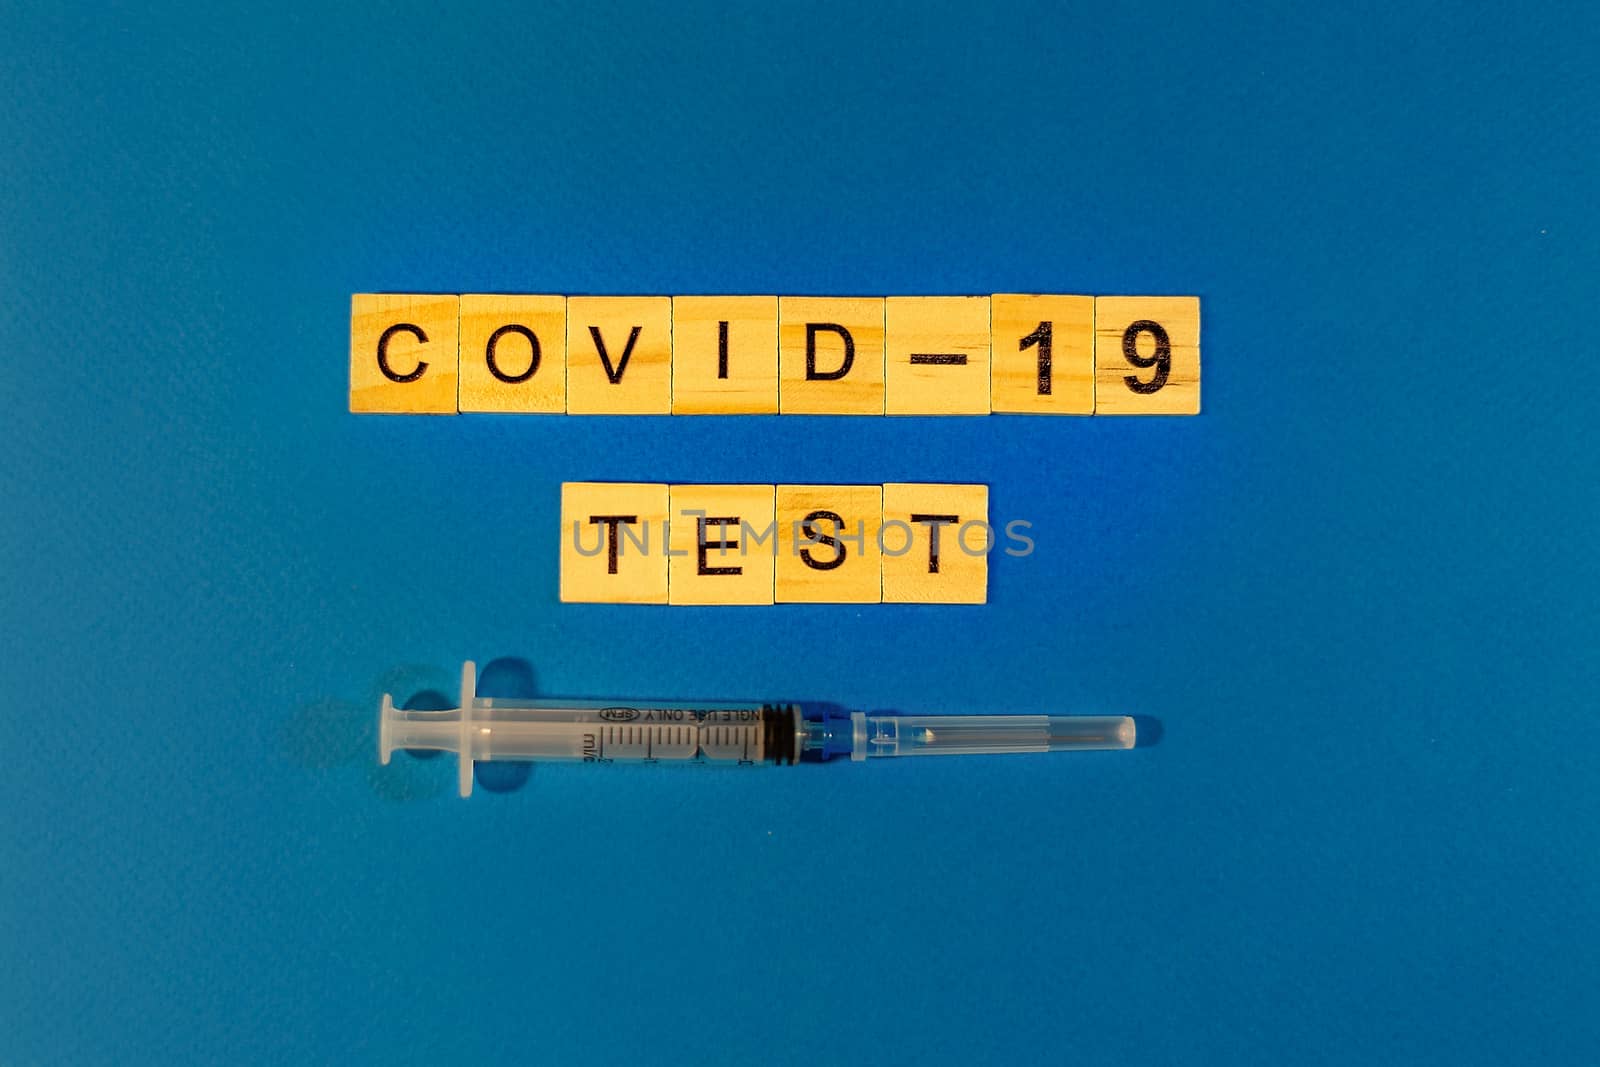 Virus Test of Coronavirus. Prevent or stop the spread of the COVID-19 worldwide. Letters test on blue background. by Pirlik